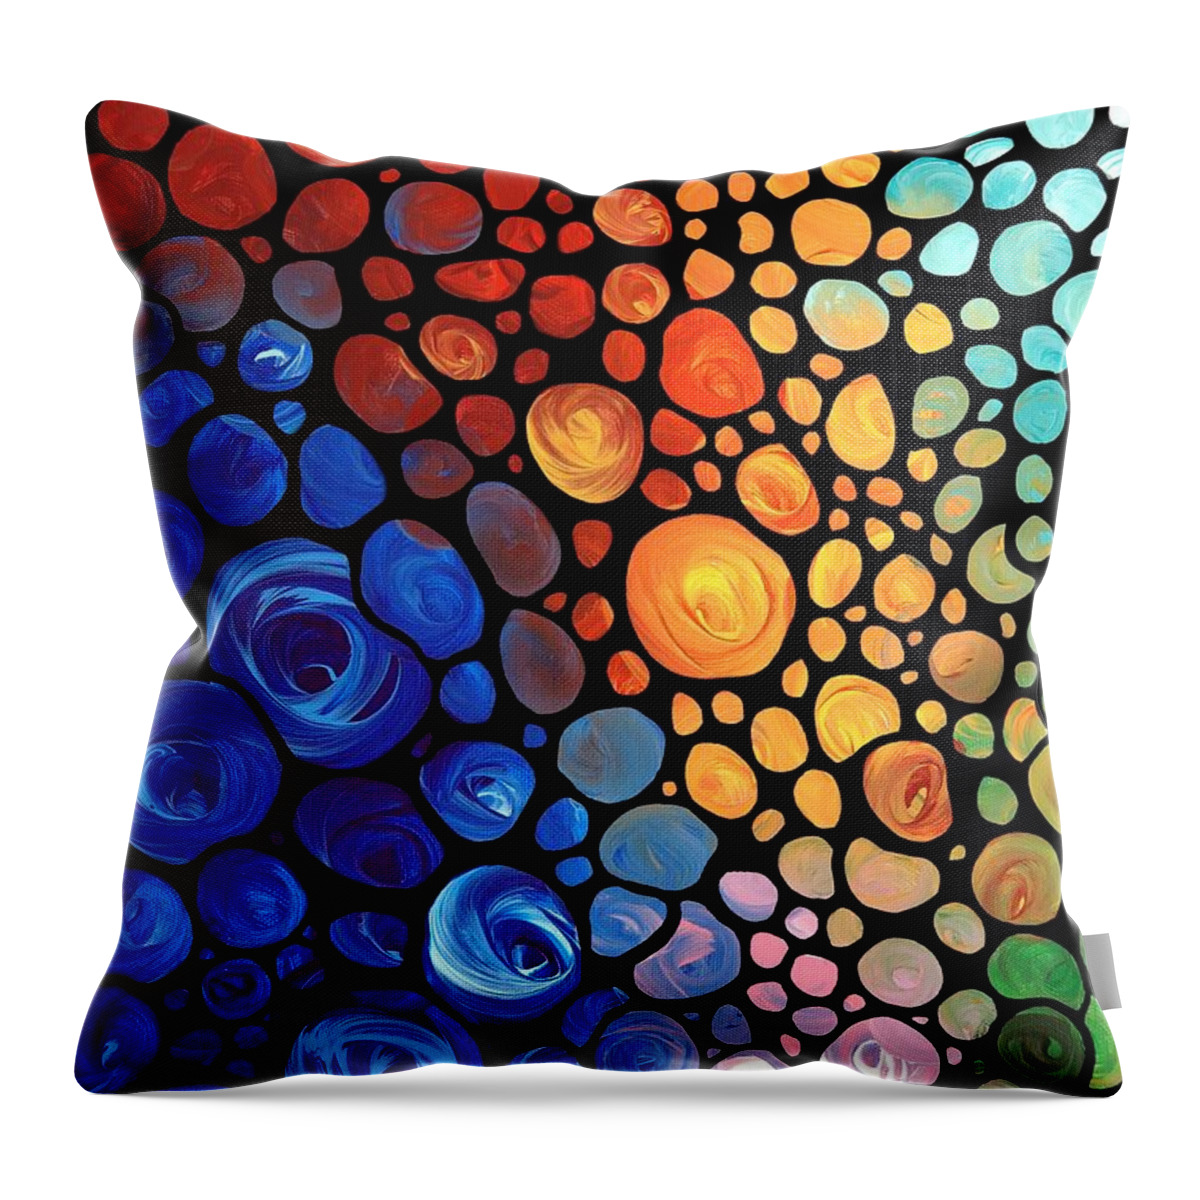 Abstract Throw Pillow featuring the painting Abstract 1 - Colorful Mosaic Art - Sharon Cummings by Sharon Cummings